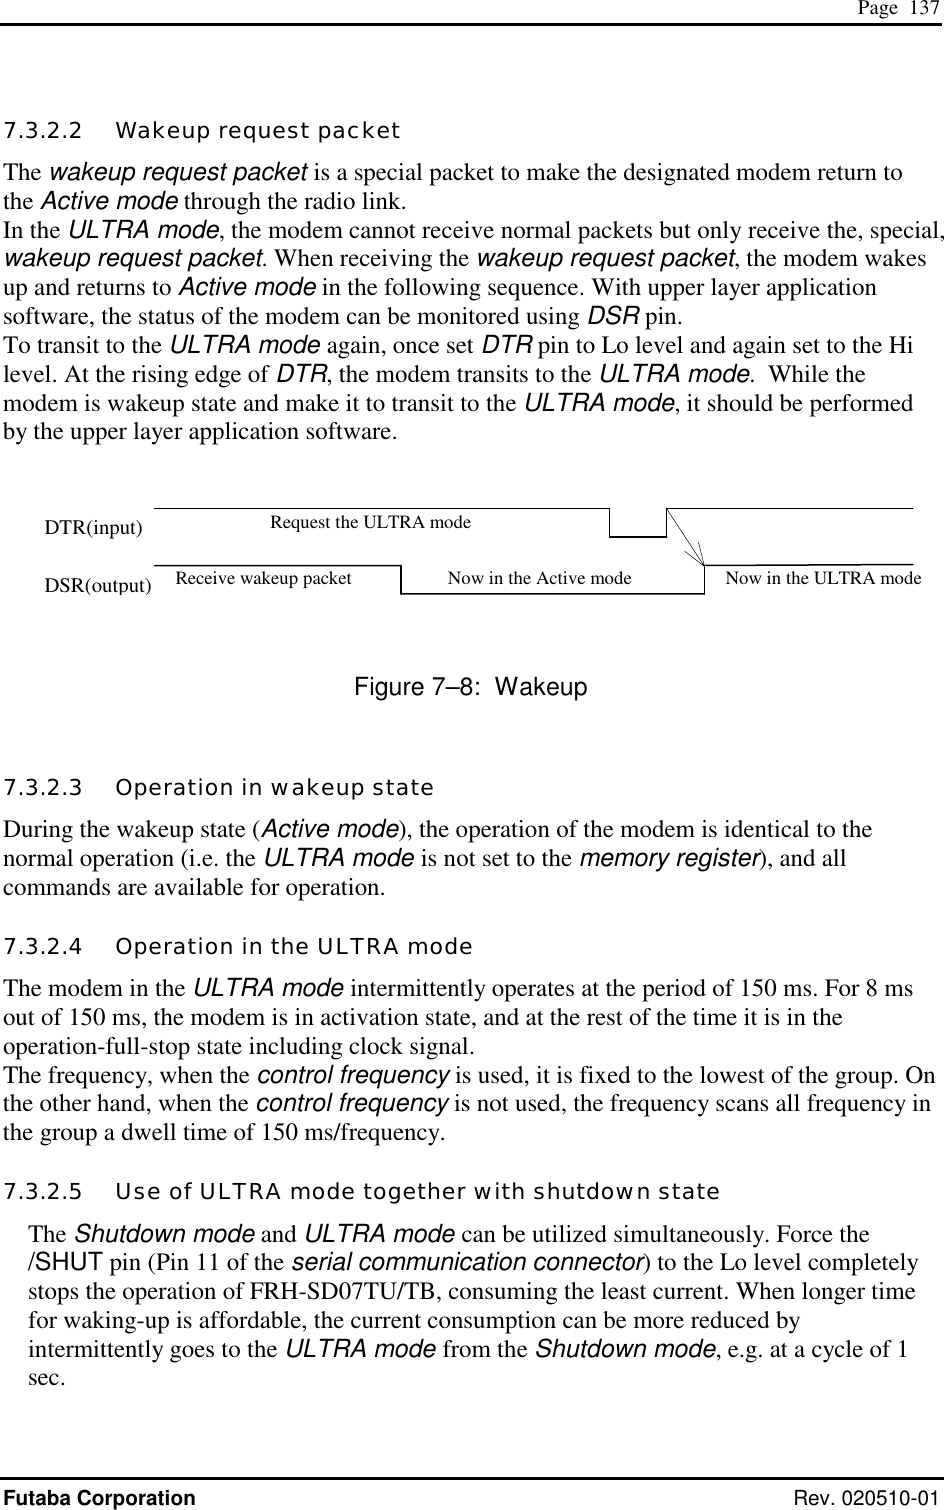  Page  137 Futaba Corporation Rev. 020510-01 7.3.2.2   Wakeup request packet The wakeup request packet is a special packet to make the designated modem return to the Active mode through the radio link. In the ULTRA mode, the modem cannot receive normal packets but only receive the, special, wakeup request packet. When receiving the wakeup request packet, the modem wakes up and returns to Active mode in the following sequence. With upper layer application software, the status of the modem can be monitored using DSR pin. To transit to the ULTRA mode again, once set DTR pin to Lo level and again set to the Hi level. At the rising edge of DTR, the modem transits to the ULTRA mode.  While the modem is wakeup state and make it to transit to the ULTRA mode, it should be performed by the upper layer application software.        Figure 7–8:  Wakeup 7.3.2.3   Operation in wakeup state During the wakeup state (Active mode), the operation of the modem is identical to the normal operation (i.e. the ULTRA mode is not set to the memory register), and all commands are available for operation.  7.3.2.4   Operation in the ULTRA mode The modem in the ULTRA mode intermittently operates at the period of 150 ms. For 8 ms out of 150 ms, the modem is in activation state, and at the rest of the time it is in the operation-full-stop state including clock signal. The frequency, when the control frequency is used, it is fixed to the lowest of the group. On the other hand, when the control frequency is not used, the frequency scans all frequency in the group a dwell time of 150 ms/frequency. 7.3.2.5   Use of ULTRA mode together with shutdown state The Shutdown mode and ULTRA mode can be utilized simultaneously. Force the /SHUT pin (Pin 11 of the serial communication connector) to the Lo level completely stops the operation of FRH-SD07TU/TB, consuming the least current. When longer time for waking-up is affordable, the current consumption can be more reduced by intermittently goes to the ULTRA mode from the Shutdown mode, e.g. at a cycle of 1 sec. Receive wakeup packet  Now in the Active mode Request the ULTRA mode Now in the ULTRA mode DTR(input) DSR(output) 